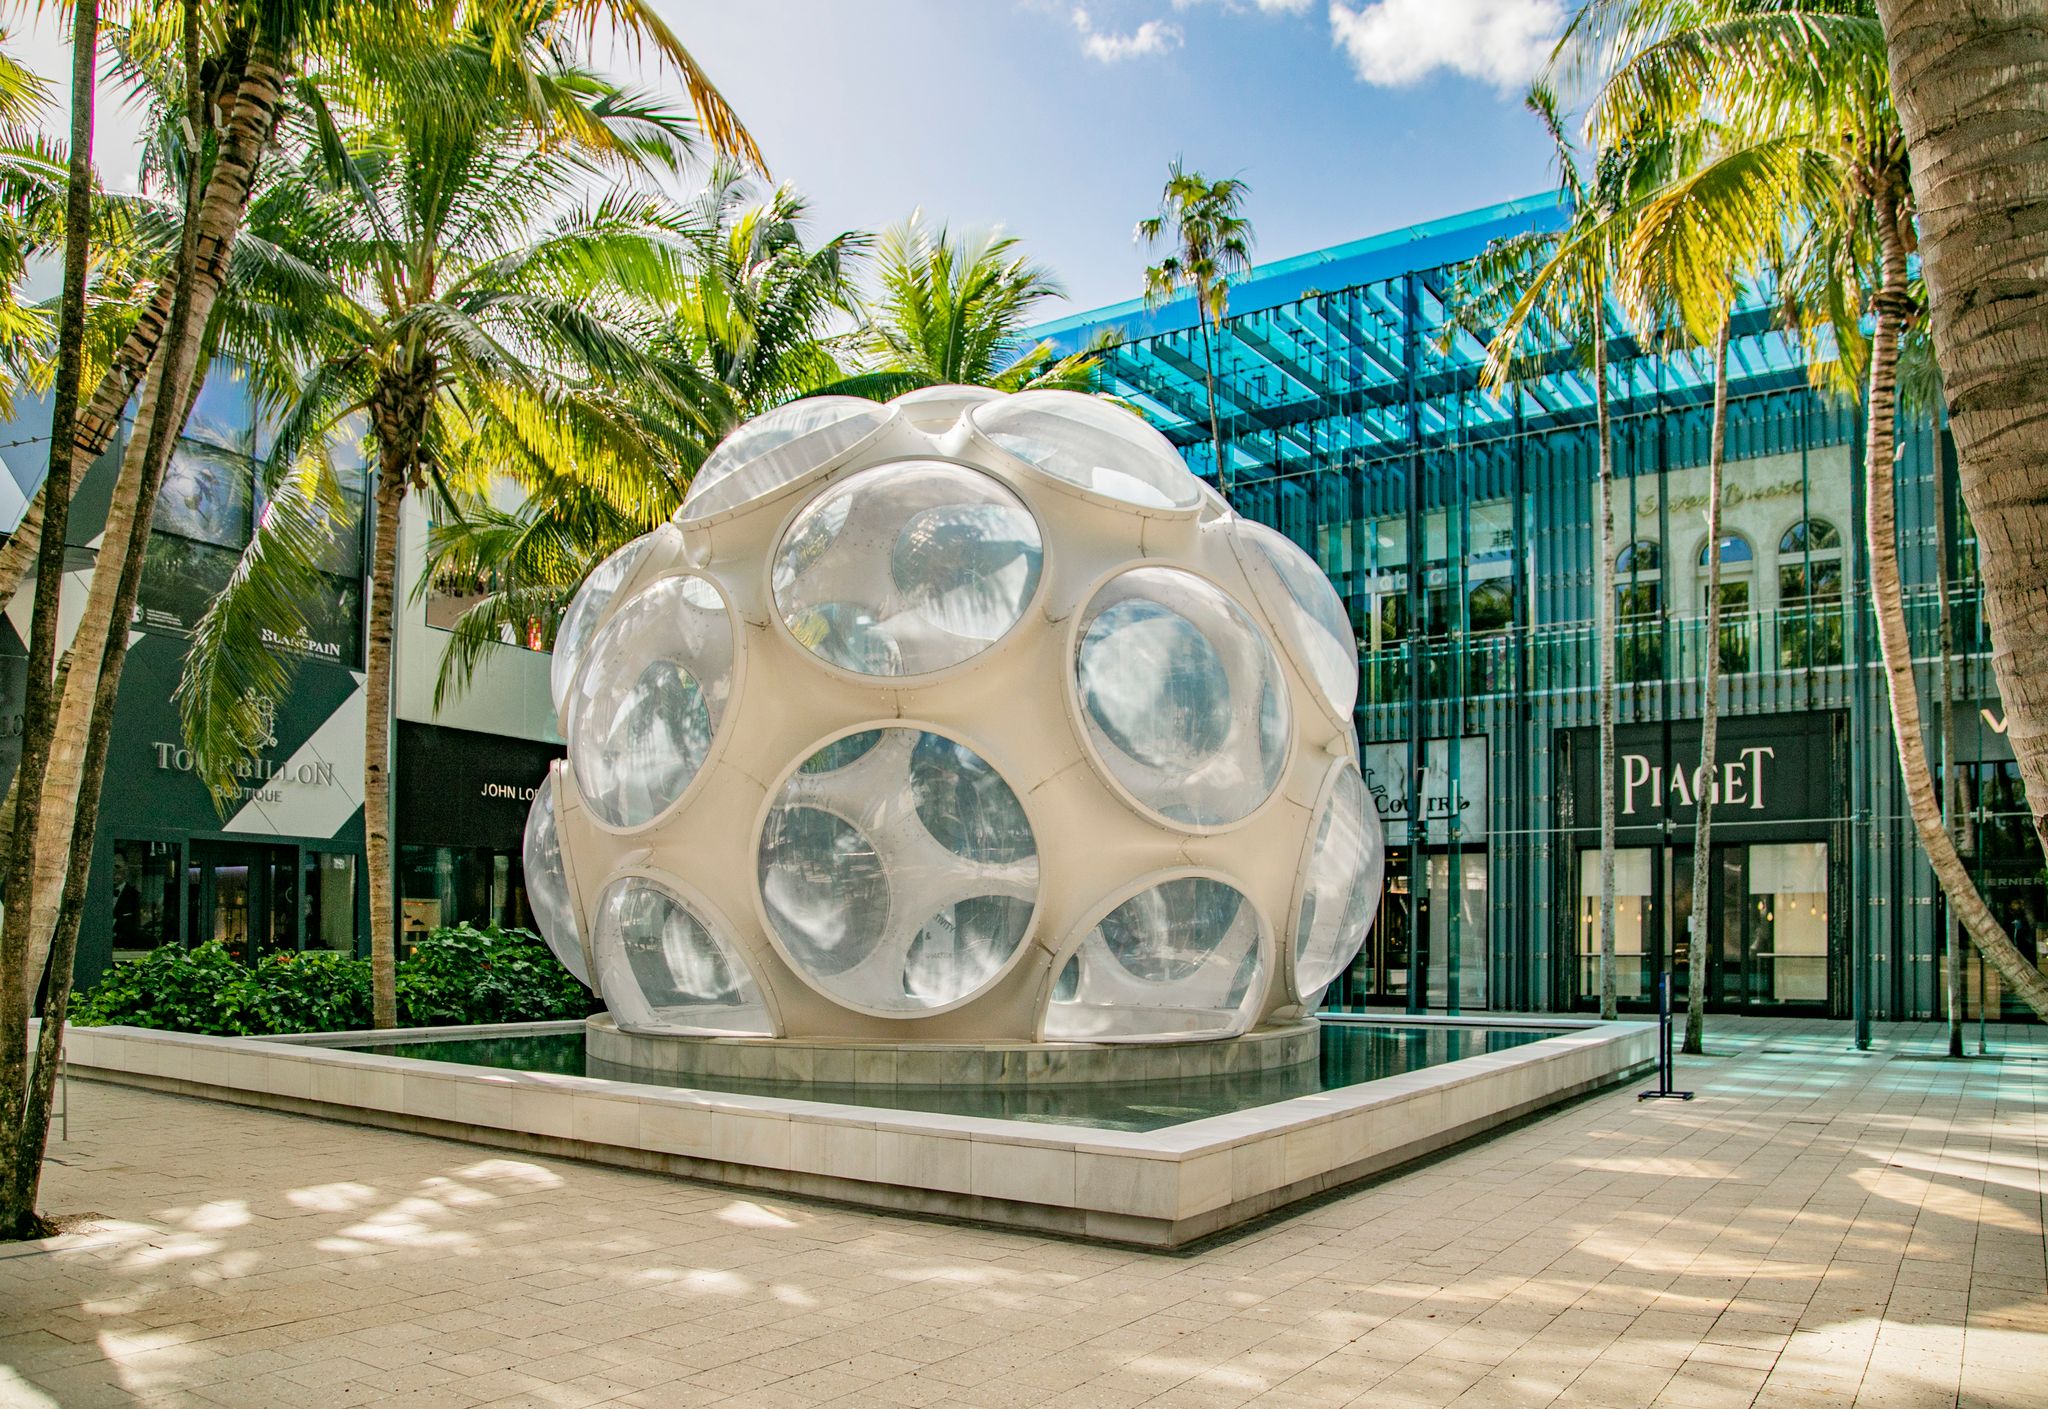 Inside Louis Vuitton's Residency in Miami's Design District